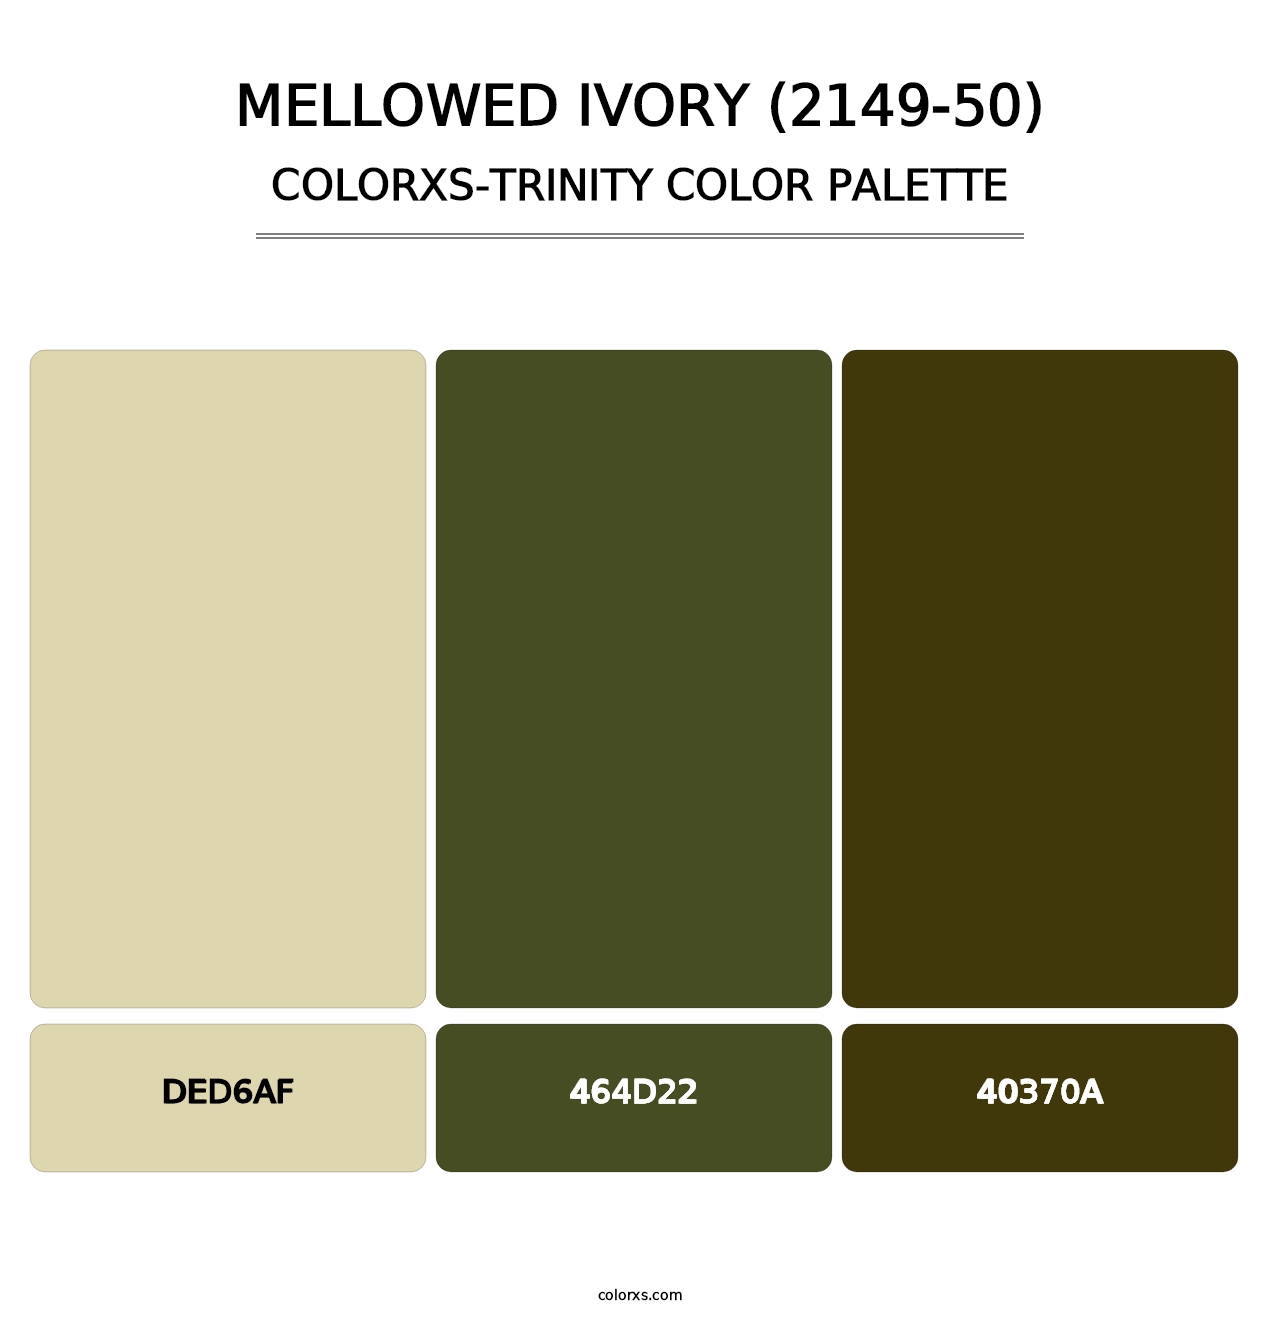 Mellowed Ivory (2149-50) - Colorxs Trinity Palette